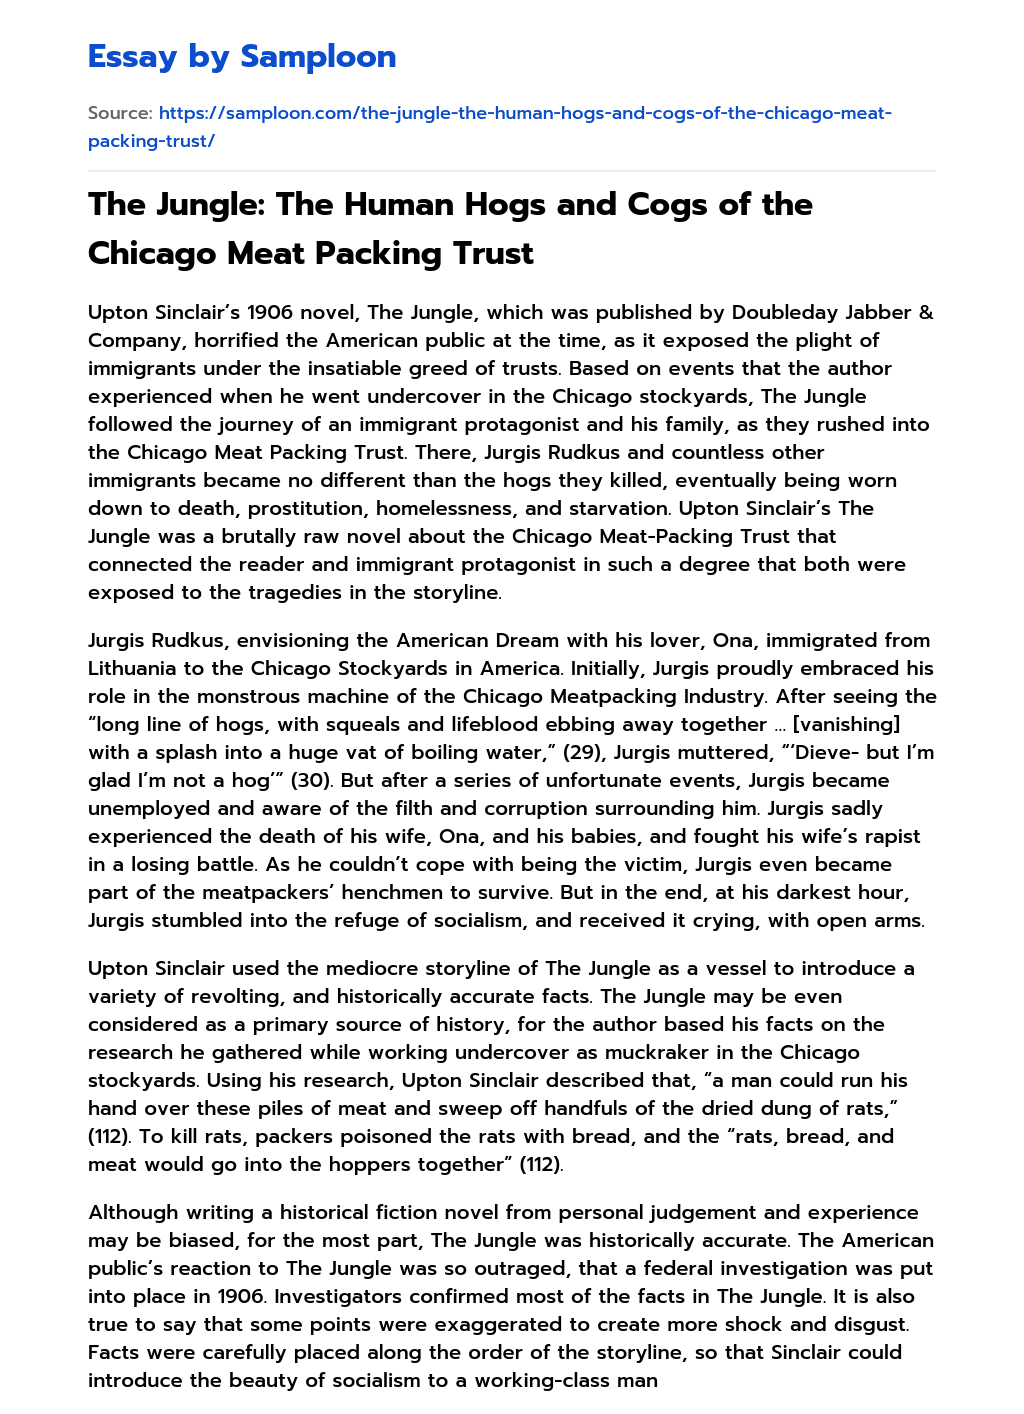 The Jungle: The Human Hogs and Cogs of the Chicago Meat Packing Trust essay